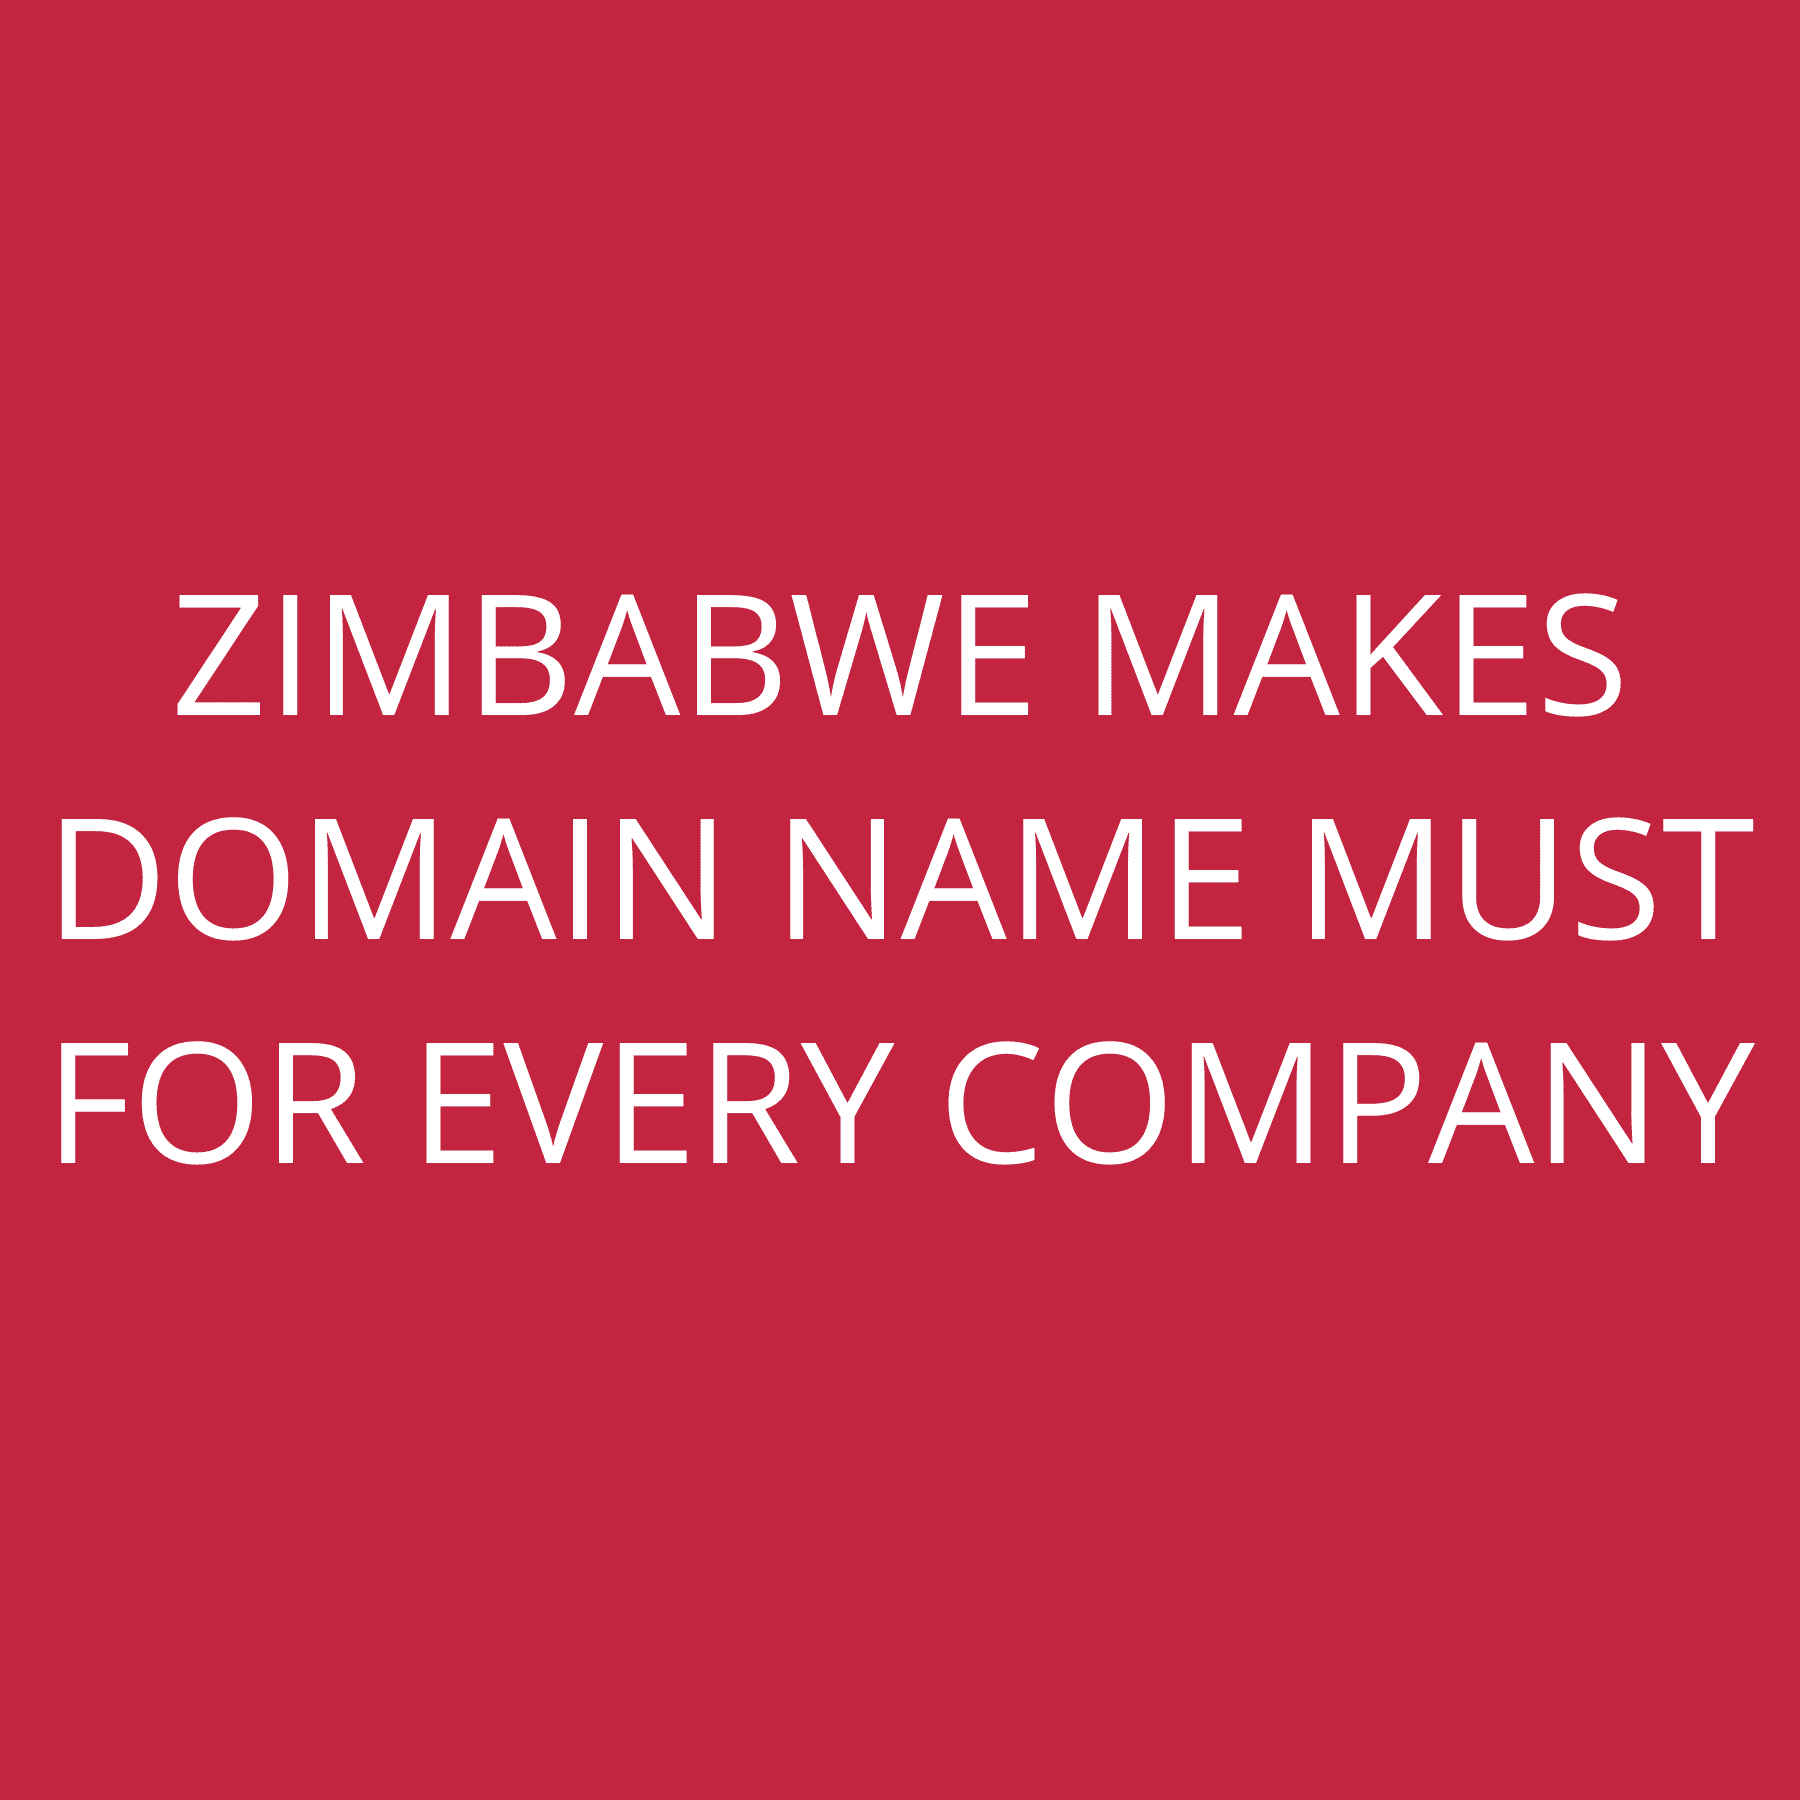 Zimbabwe makes domain name must for every company